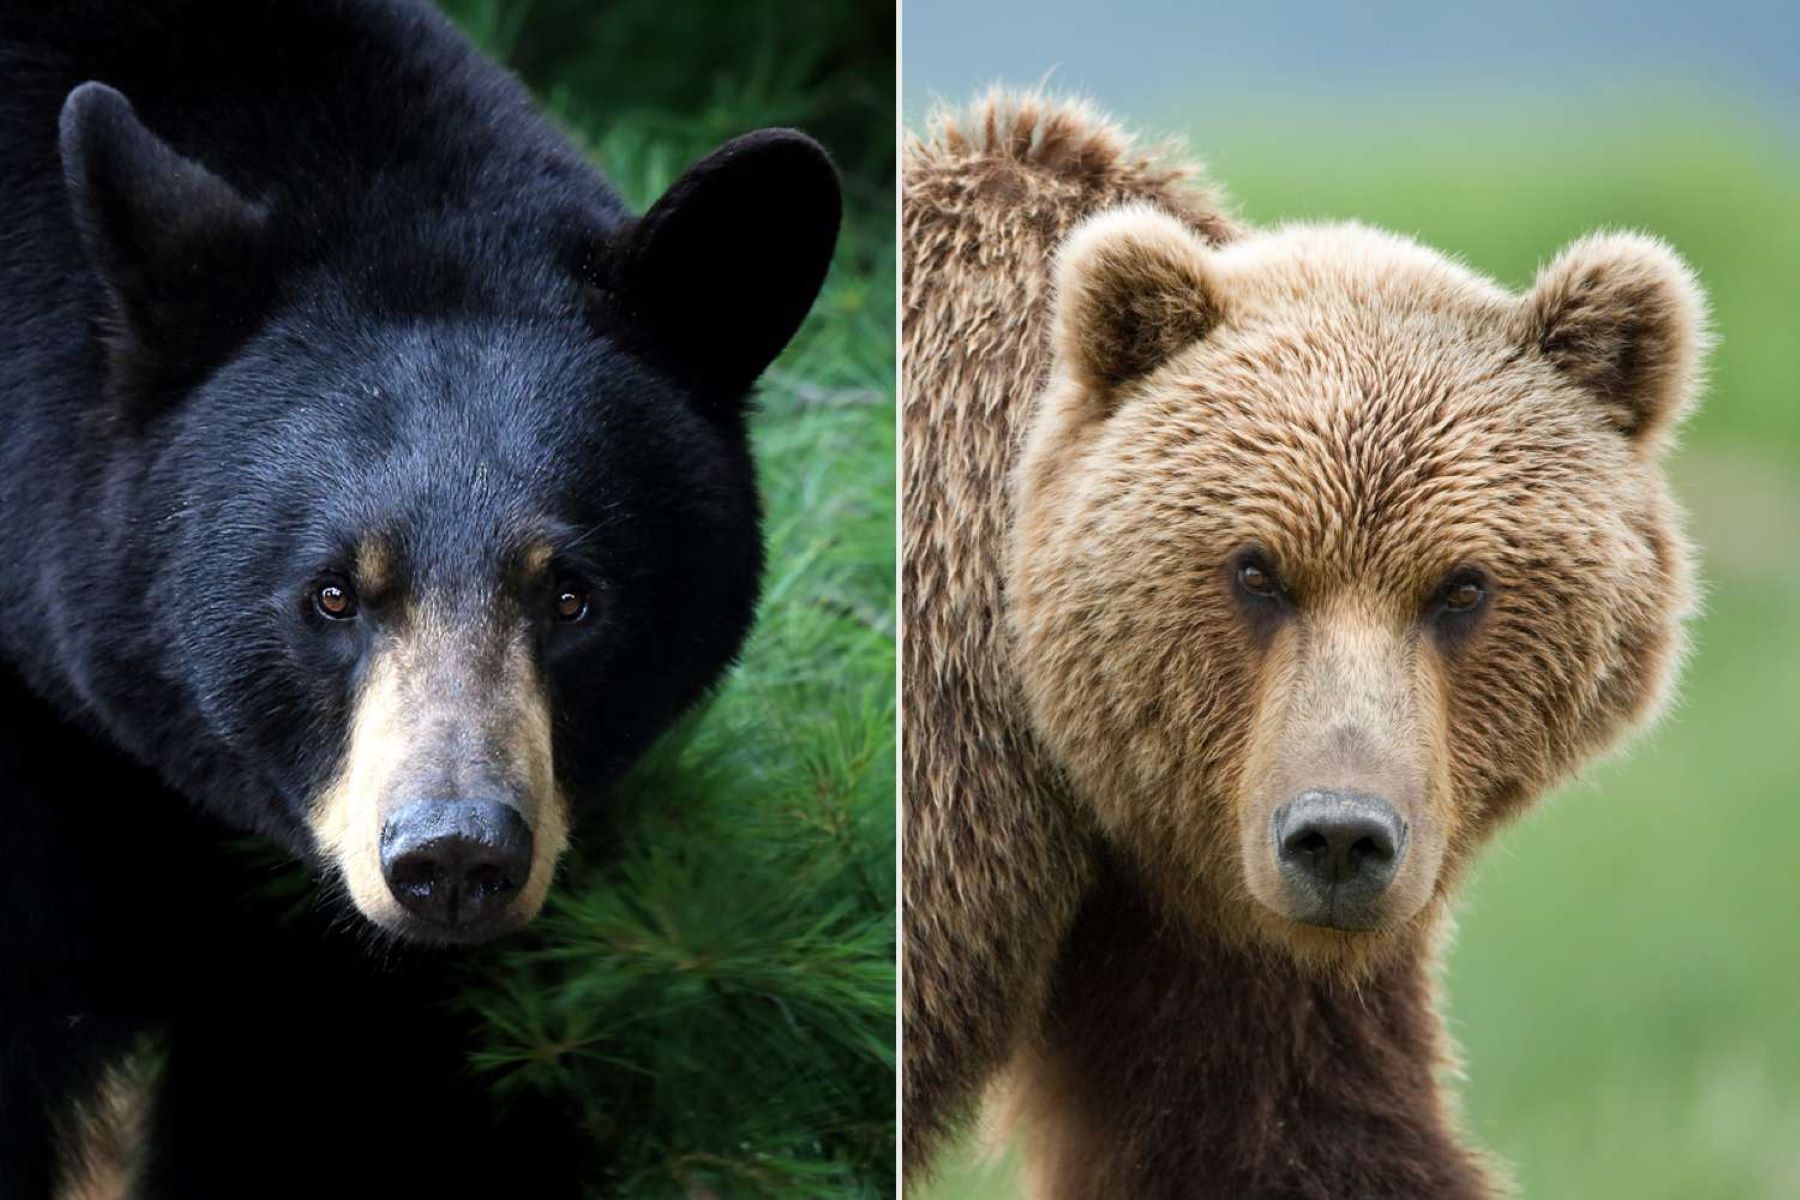 Shocking Truth: Black Bears Vs Grizzly Bears – Who’s More Dangerous To Humans?